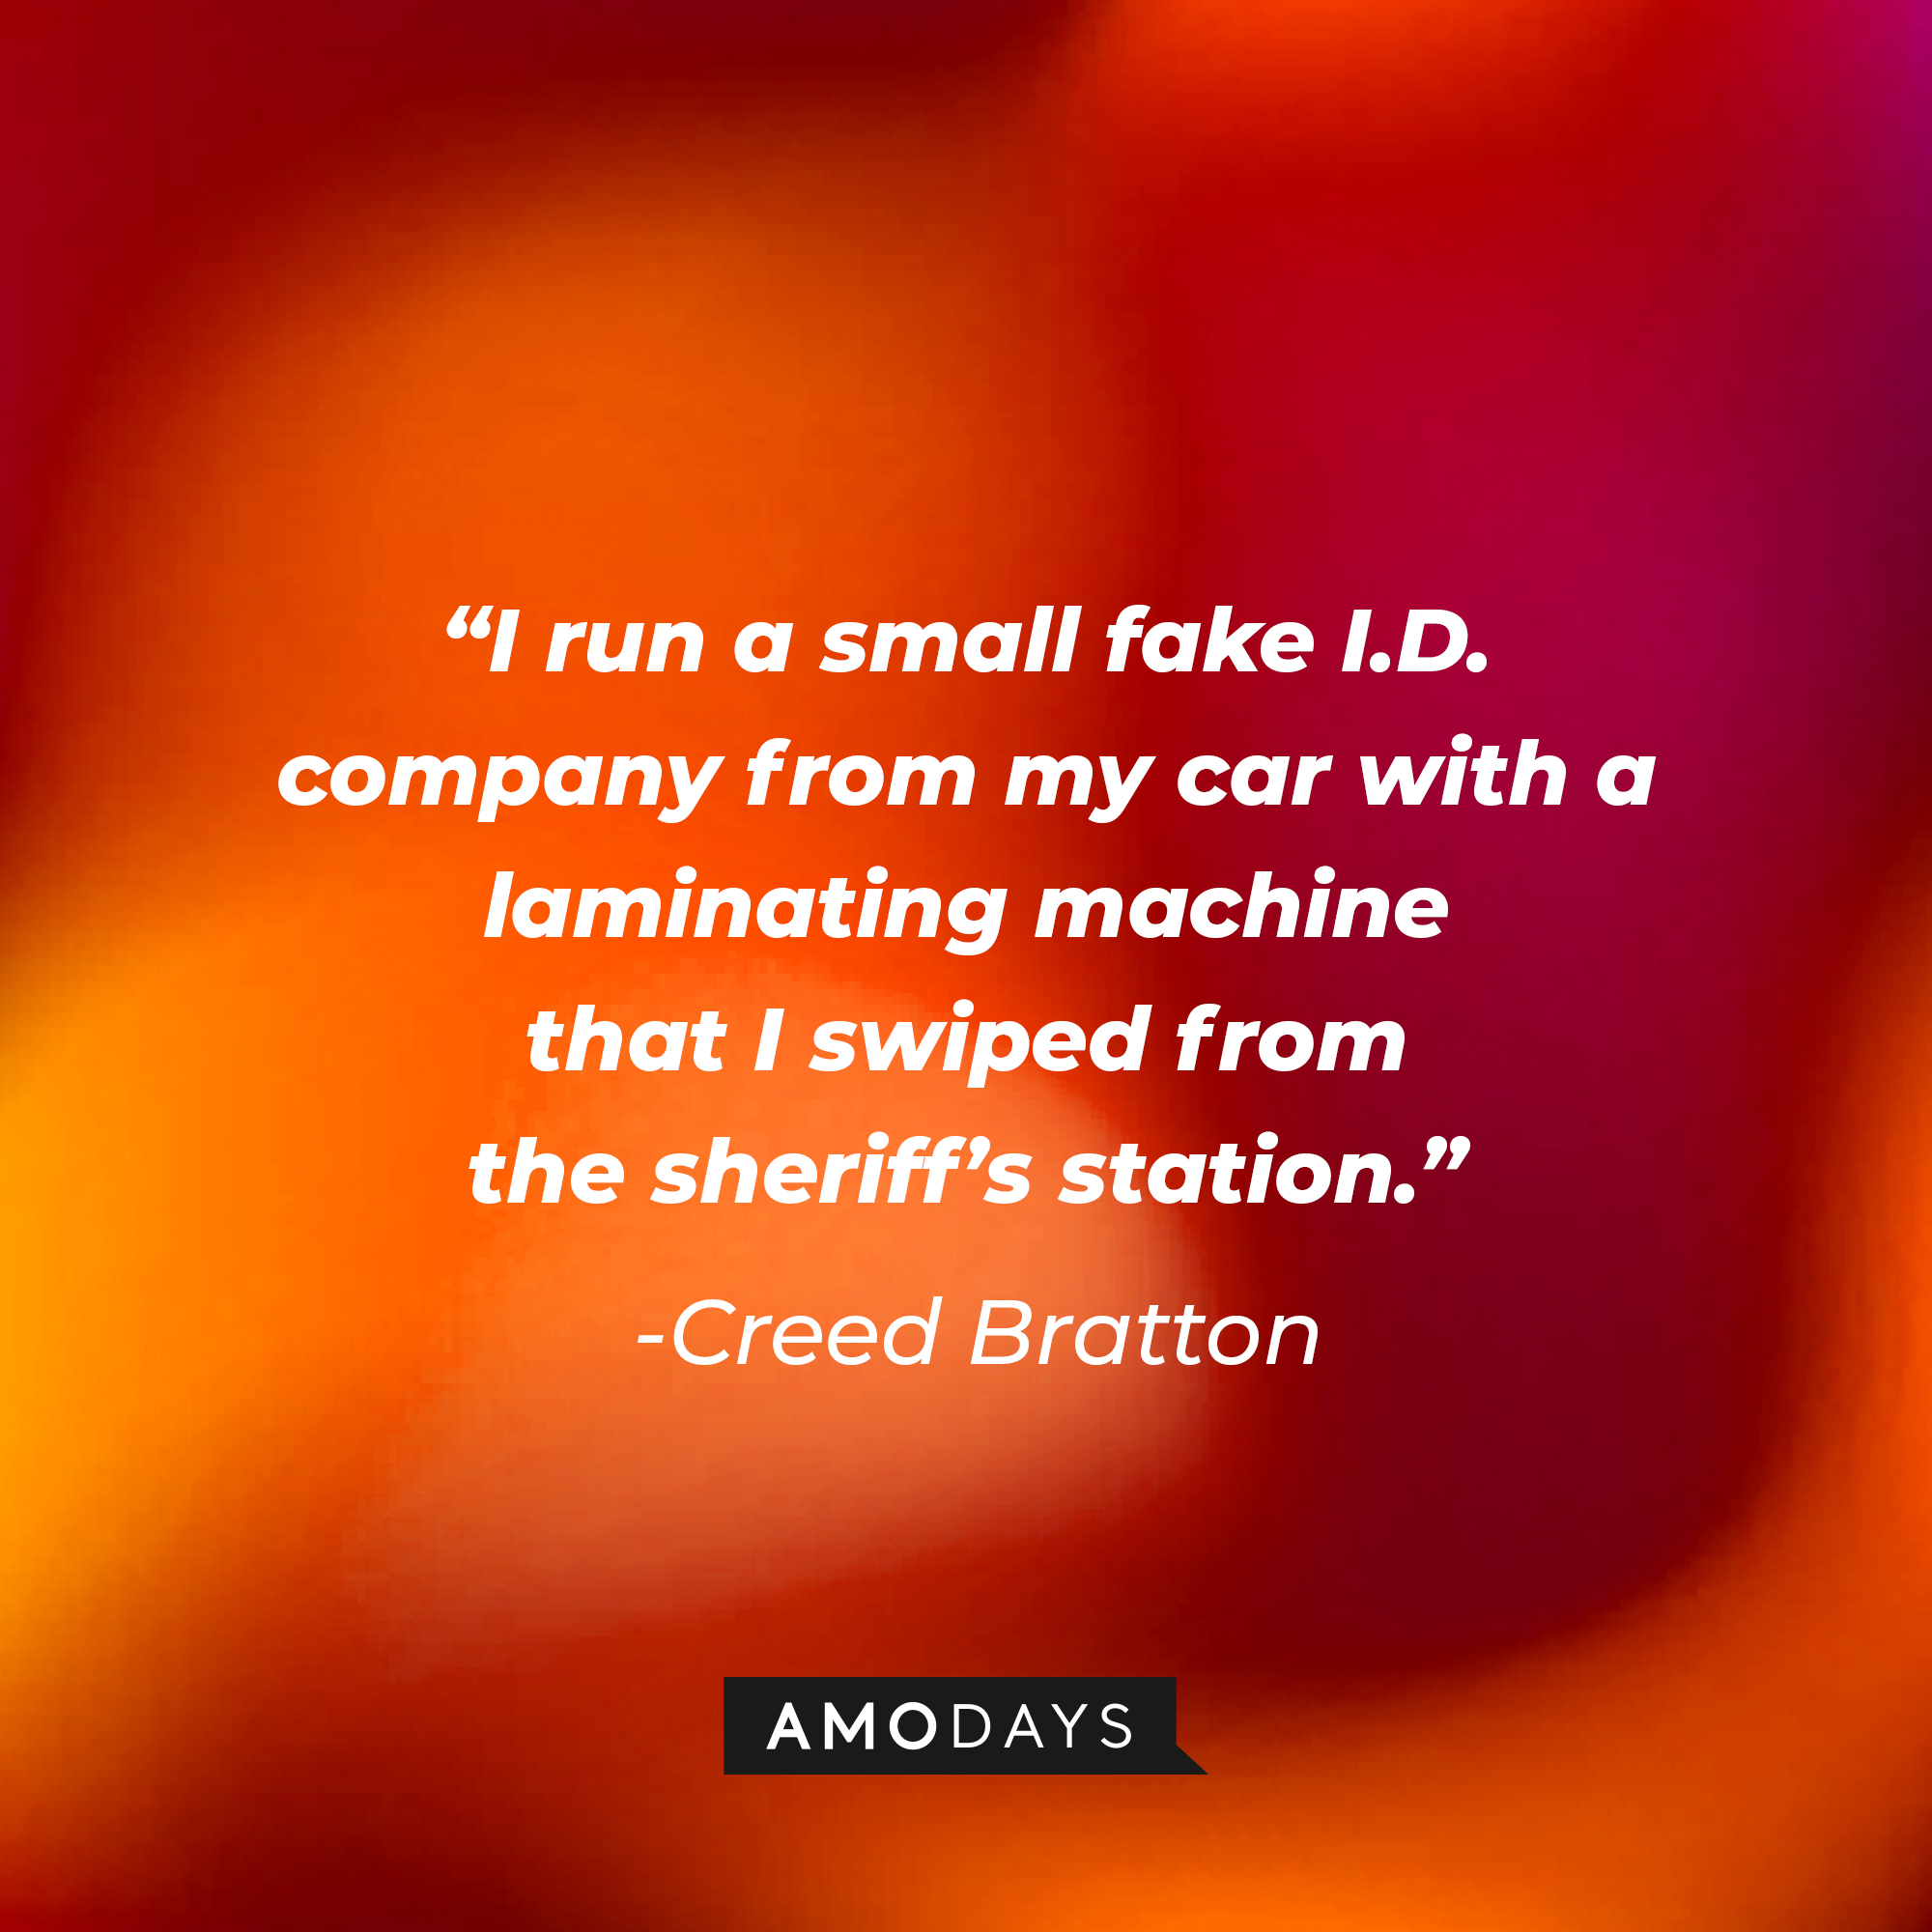 Creed Bratton's quote: "I run a small fake I.D. company from my car with a laminating machine that I swiped from the sheriff's station." | Source: Amodays